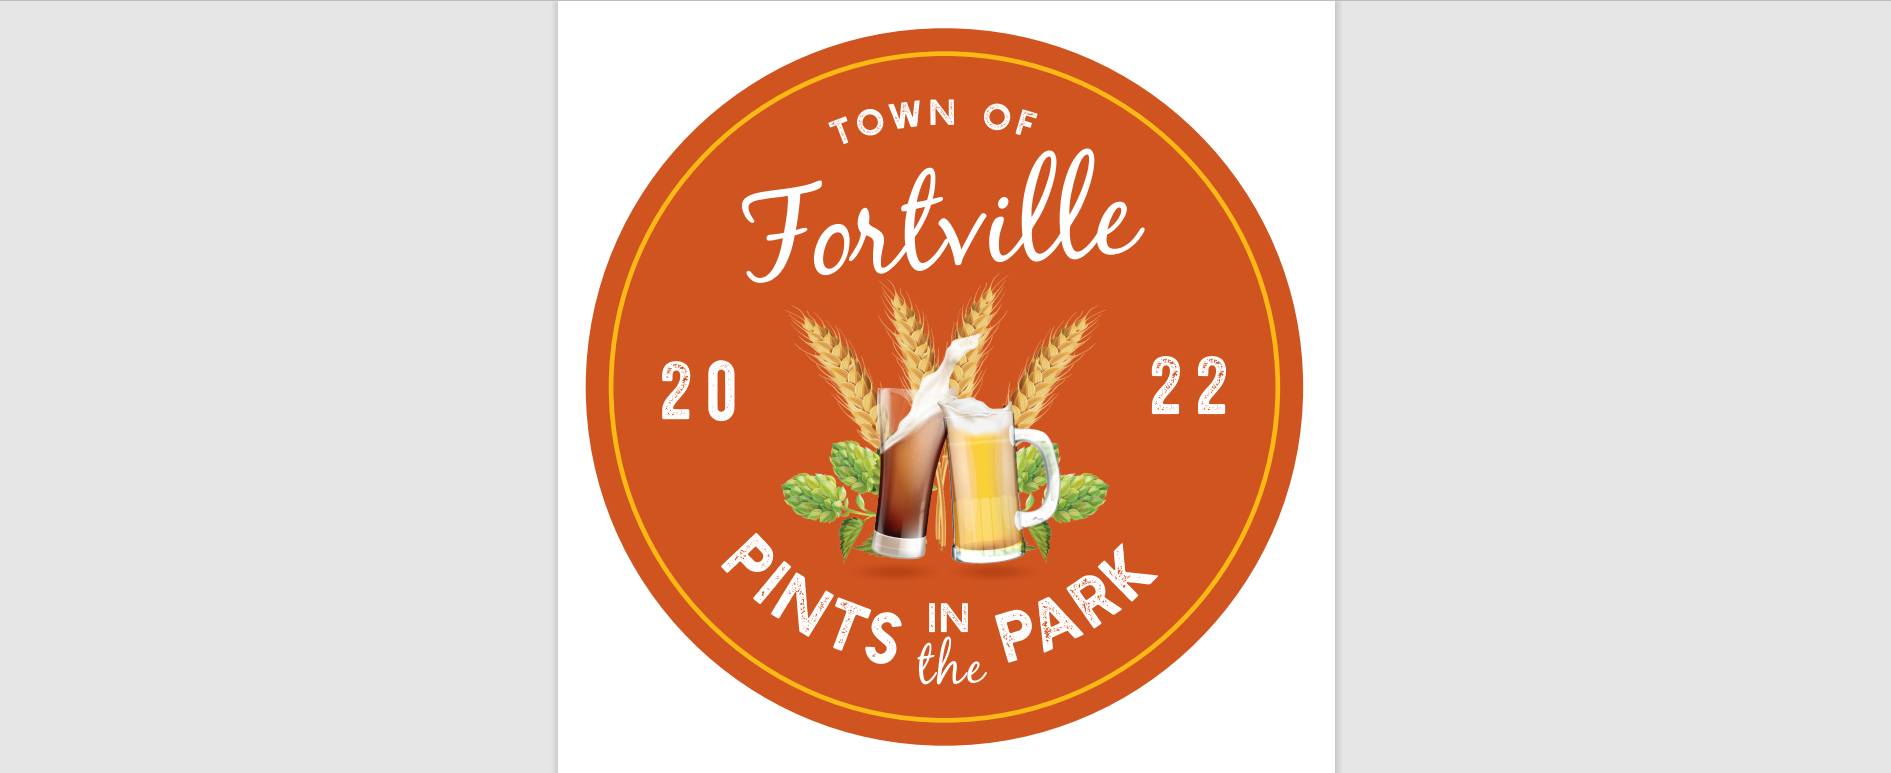 Pints in the Park Town of Fortville